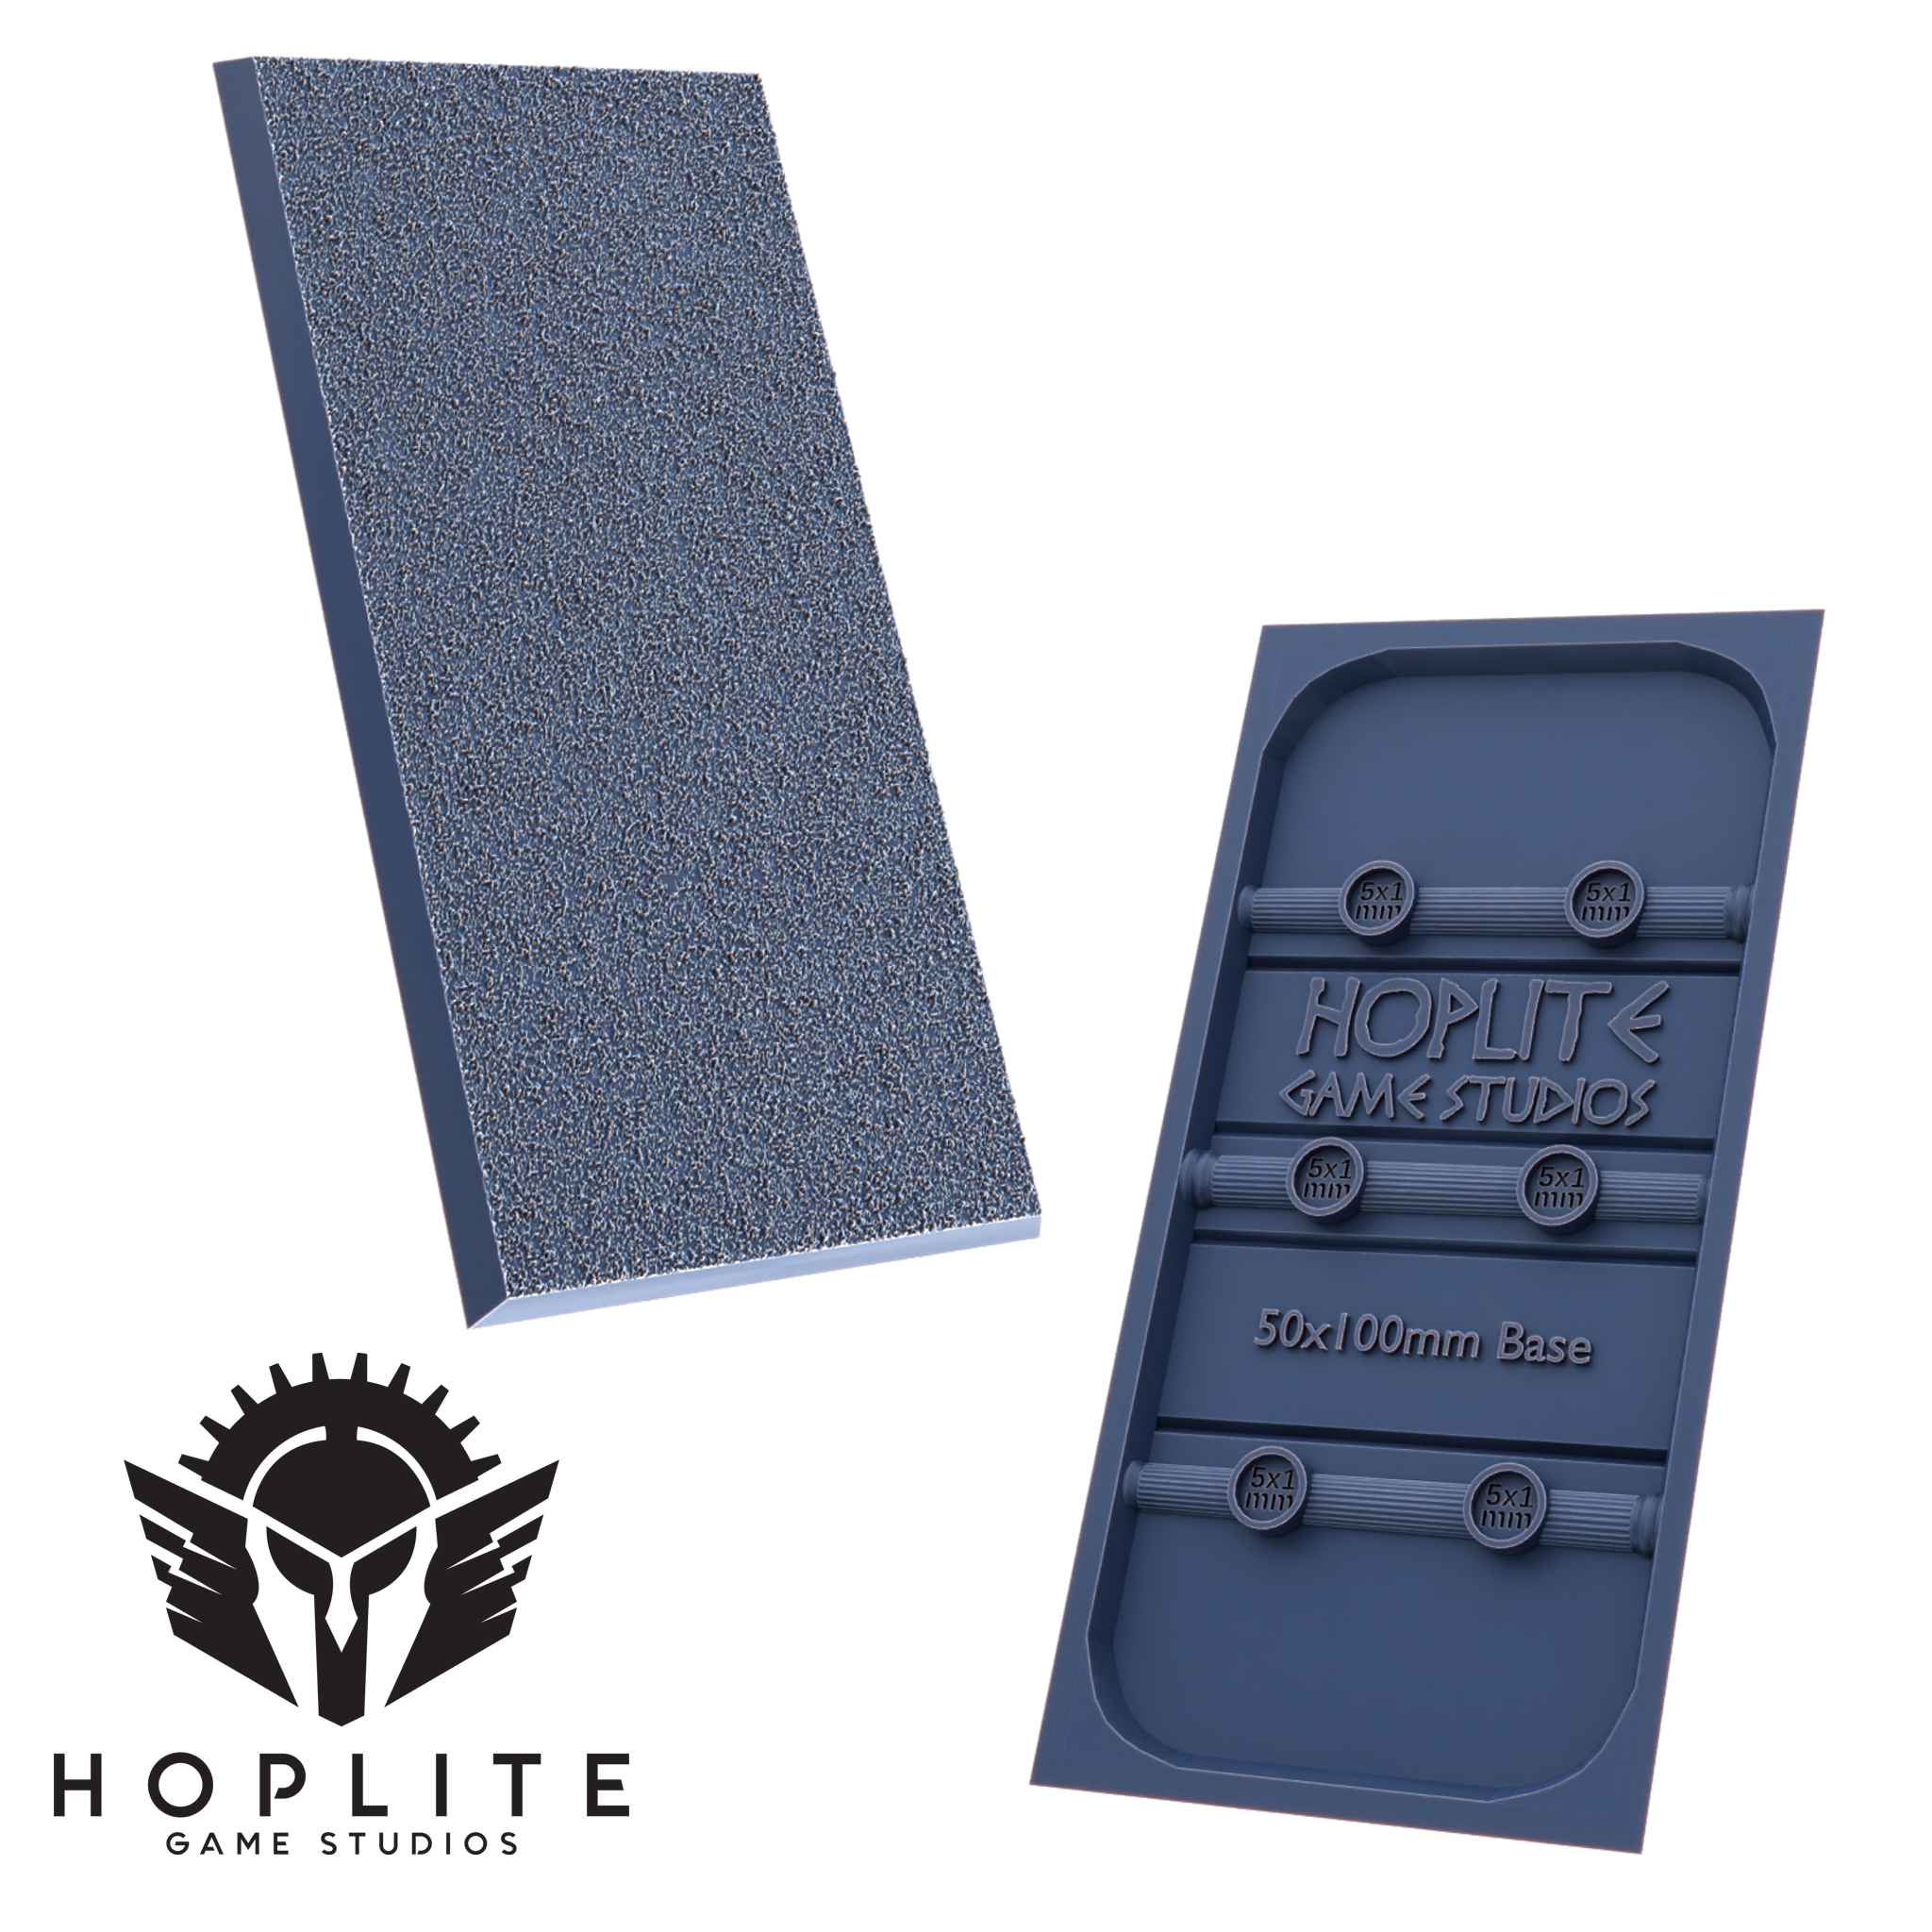 Hoplite Textured Magnetizable Square Bases | Fantasy Square Bases | 25mm | 30mm | 40mm | 50mm | and more sizes